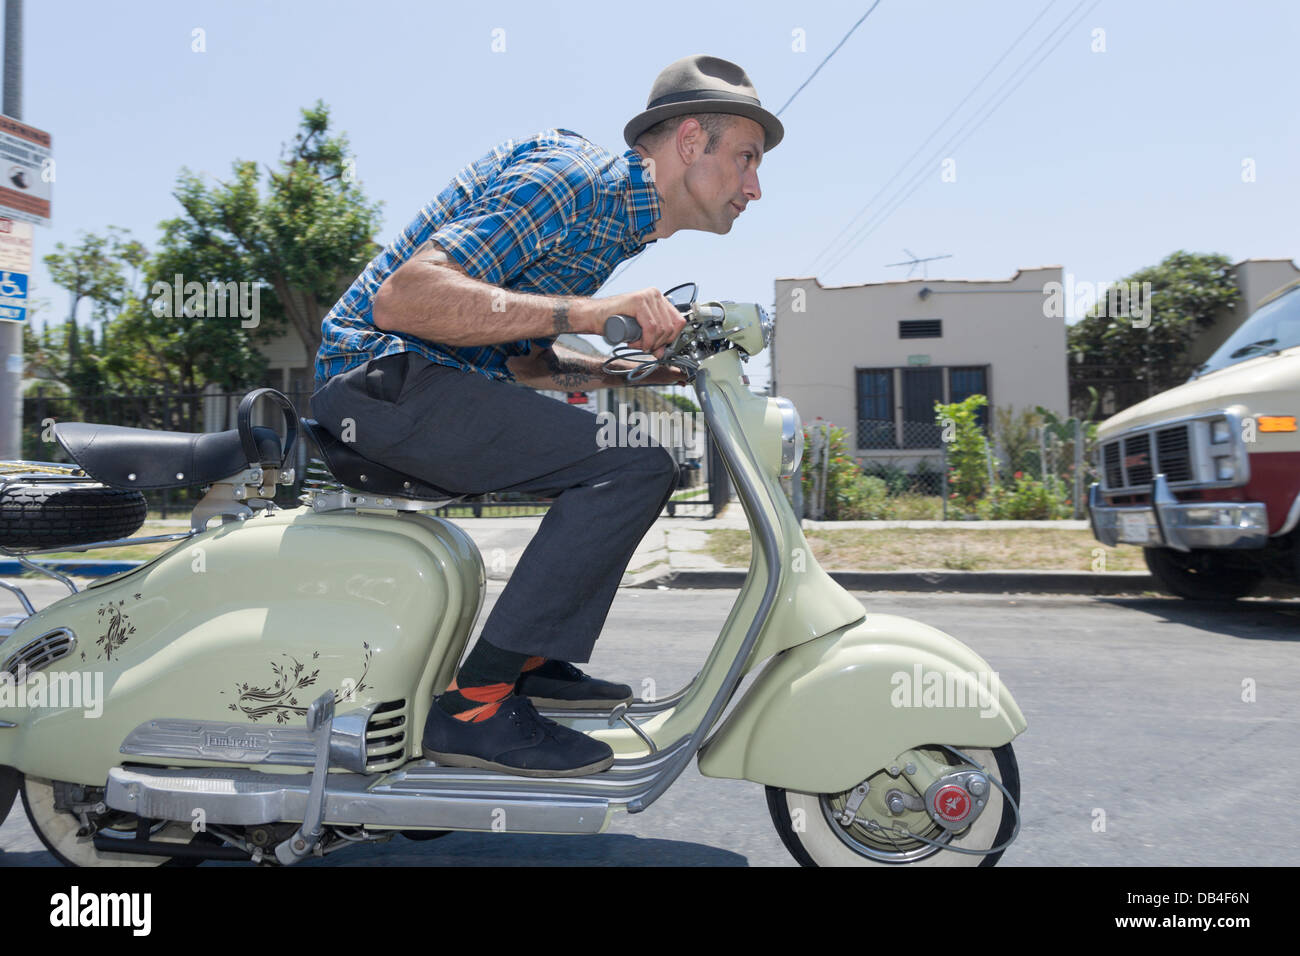 SILVERLAKE, CA JULY 3  - Aaron Rose riding a moped in Silverlake, California on July 3, 2008. Stock Photo